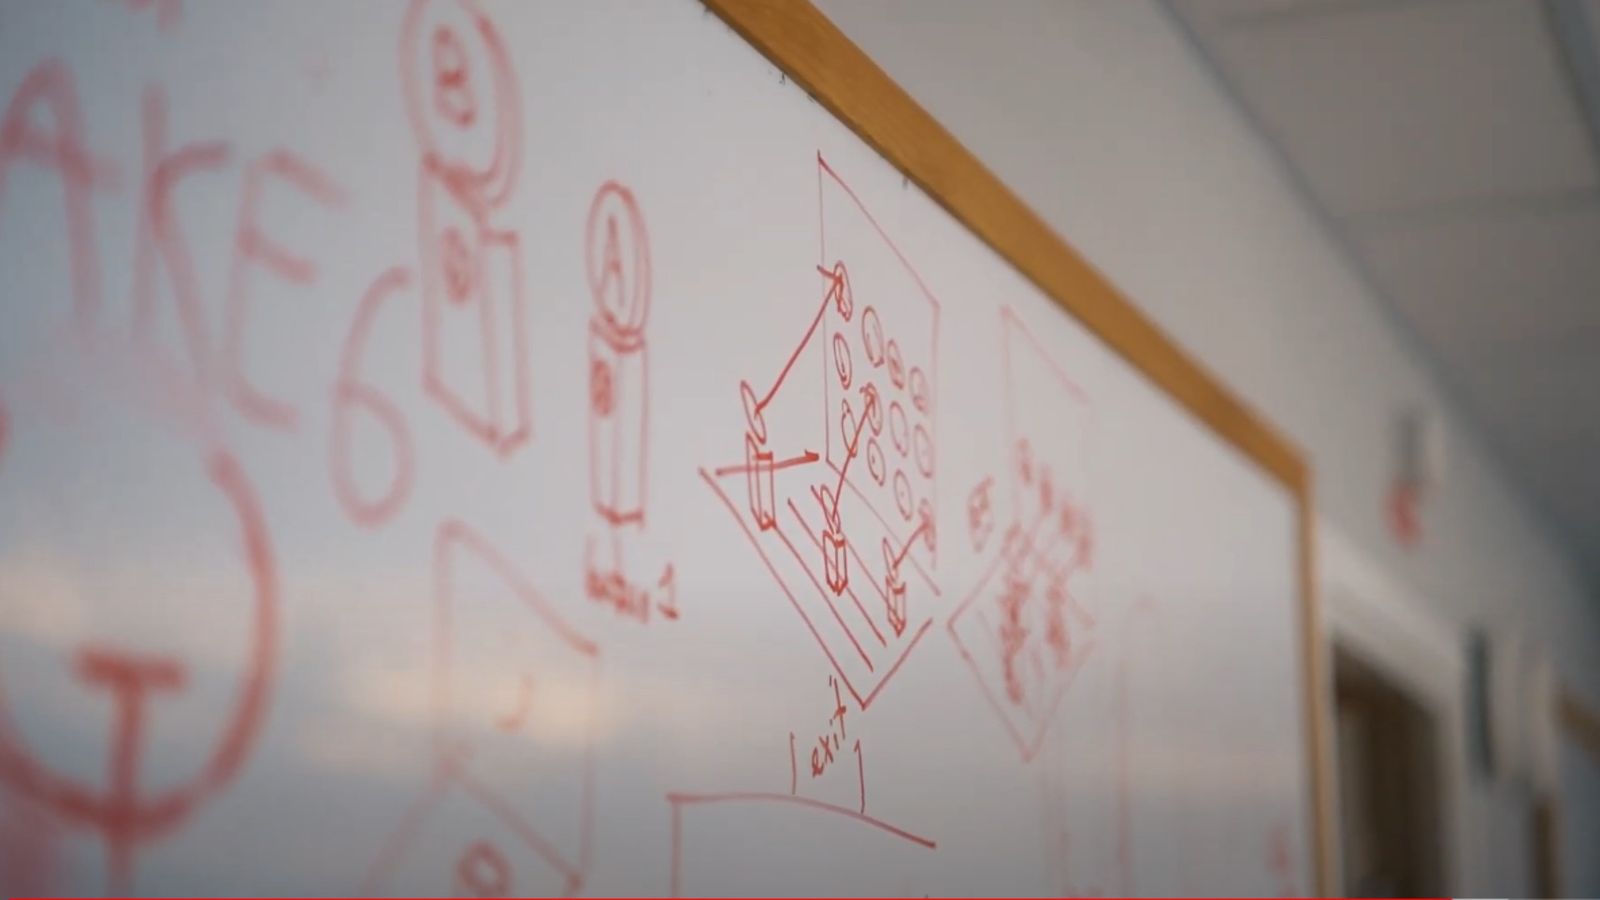 Quake 6 logo on a whiteboard alongside puzzle planning for Indiana jones and the great circle 